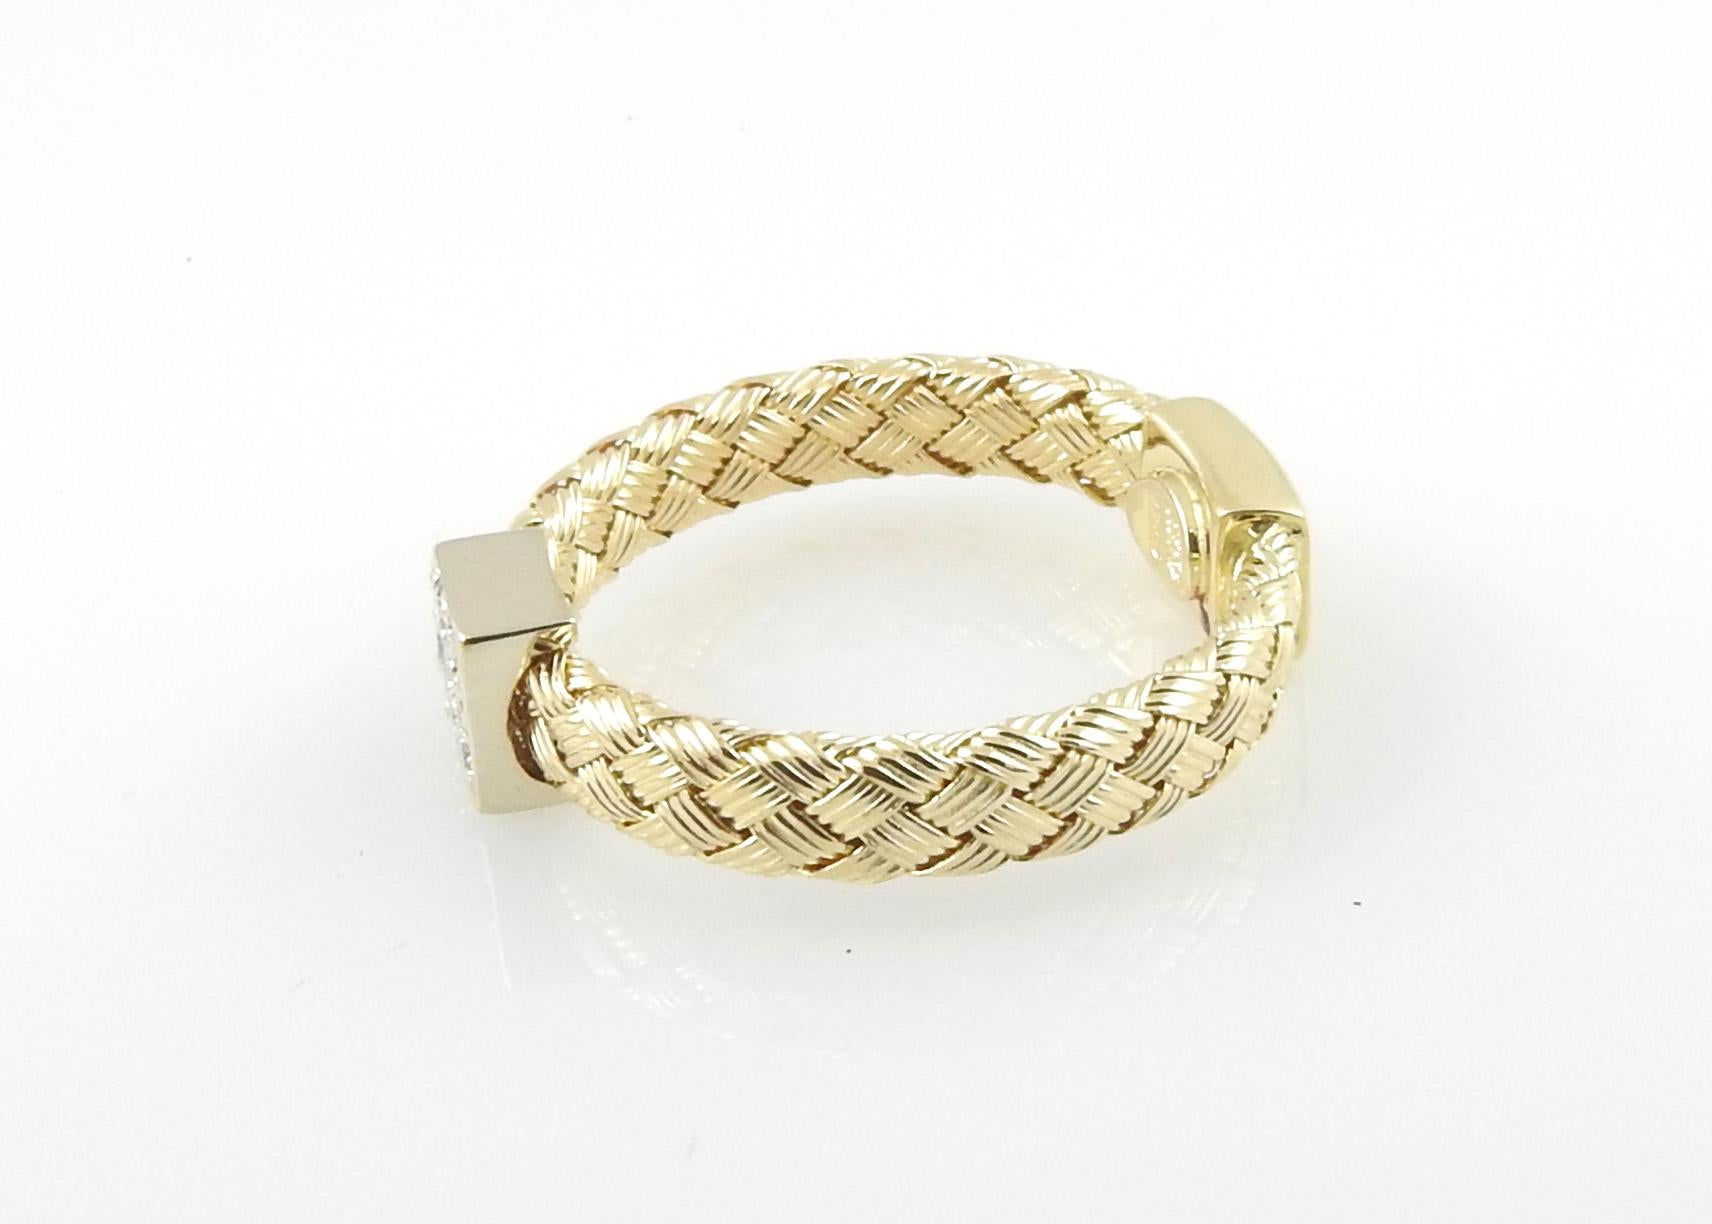 Roberto Coin 18K Yellow Gold Primavera Diamond Basket Weave Band 

Size 6.5

This beautiful cable band is set in yellow gold and has one square diamond station. 

The diamond station is set with 7 round brilliant diamonds of VS clarity and G